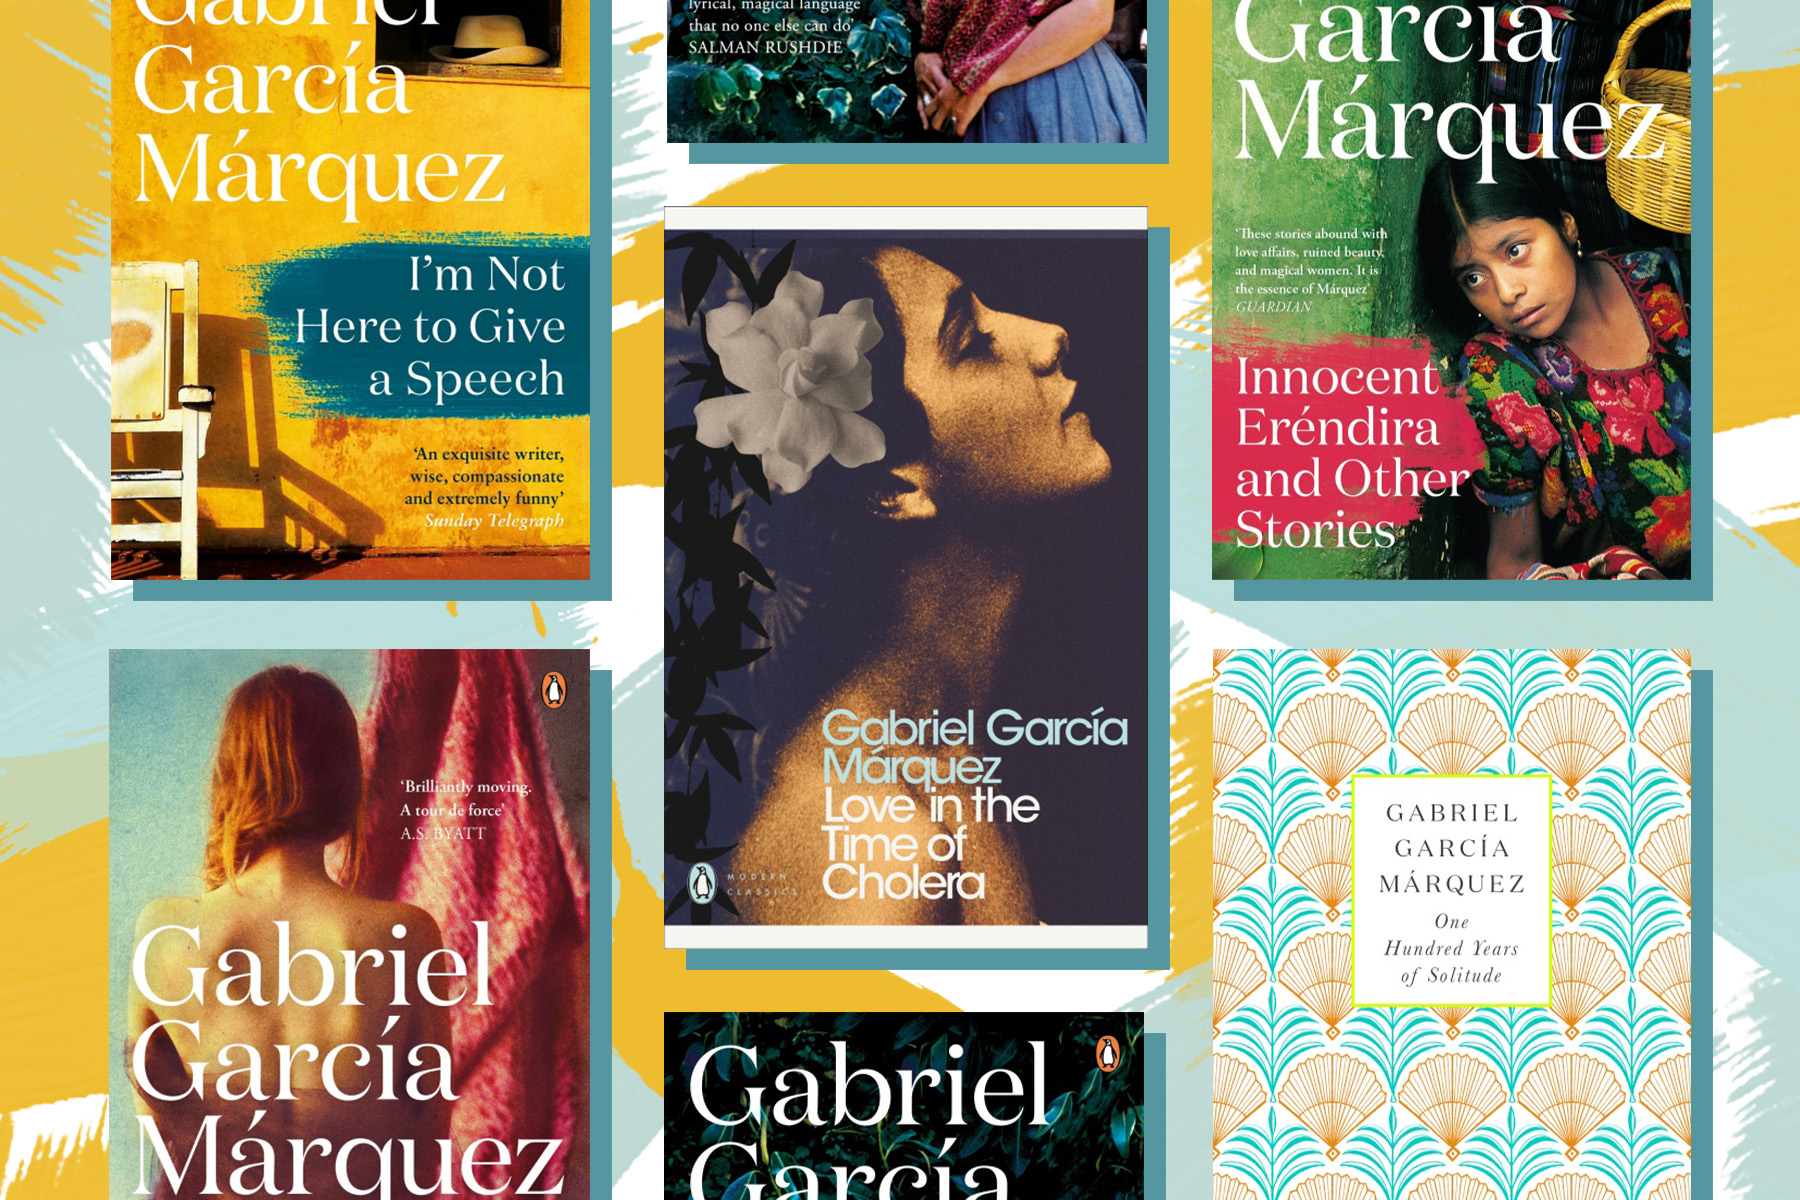 Gabriel Garcia Márquez's books on a yellow and pale blue background.